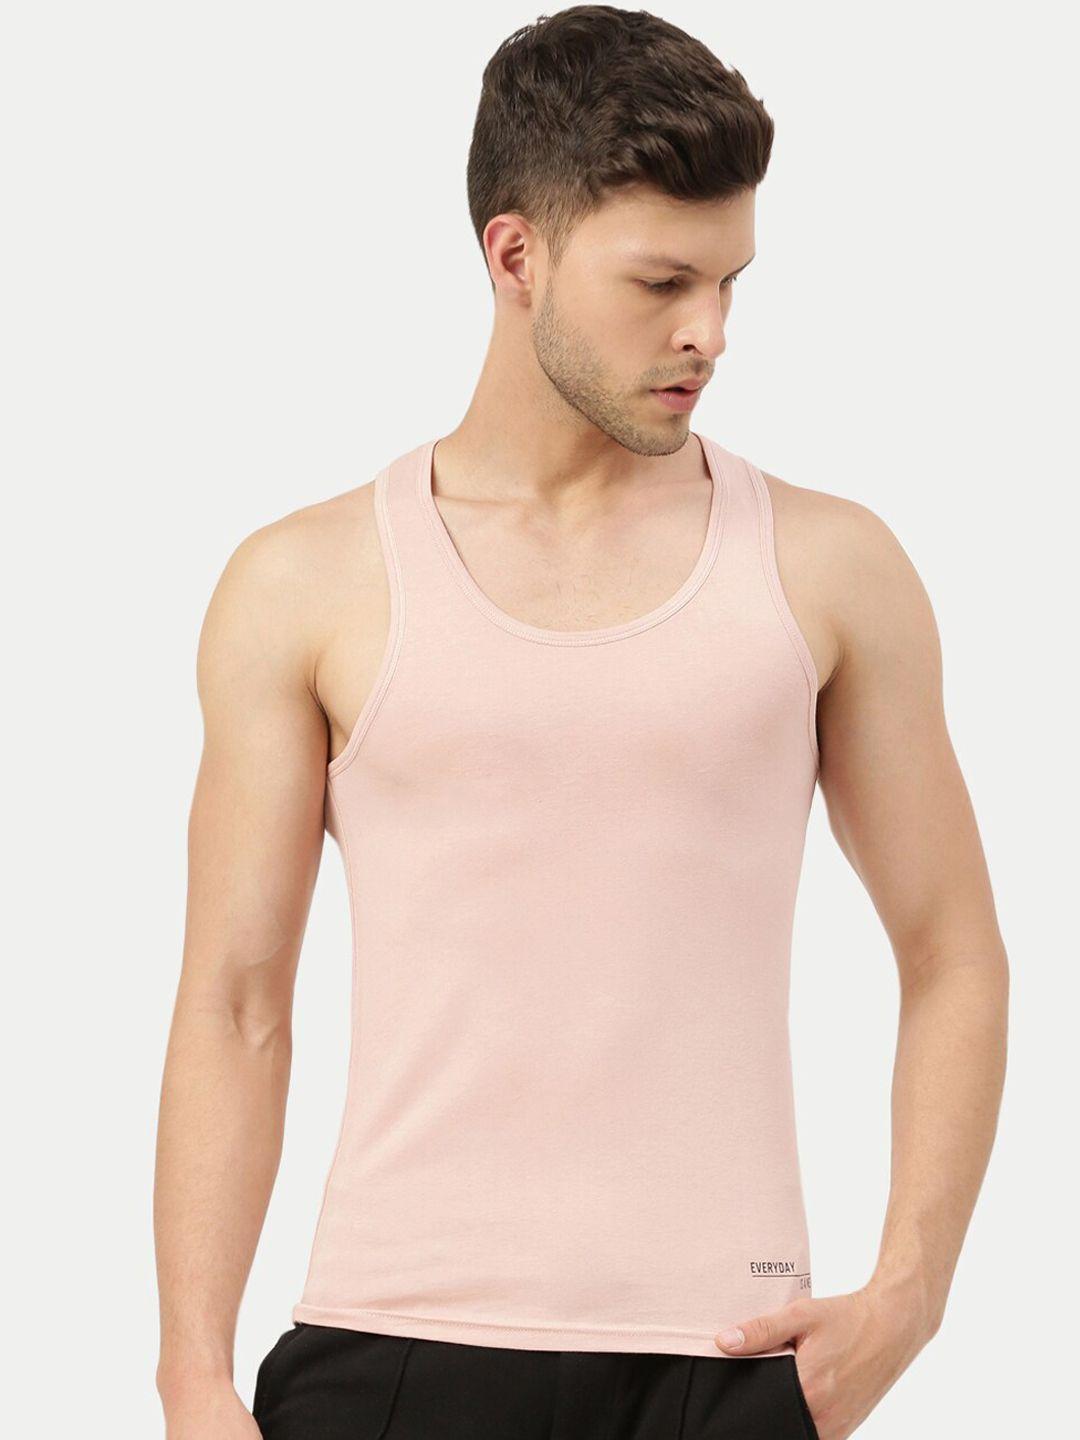 freecultr bamboo cotton innerwear basic vests